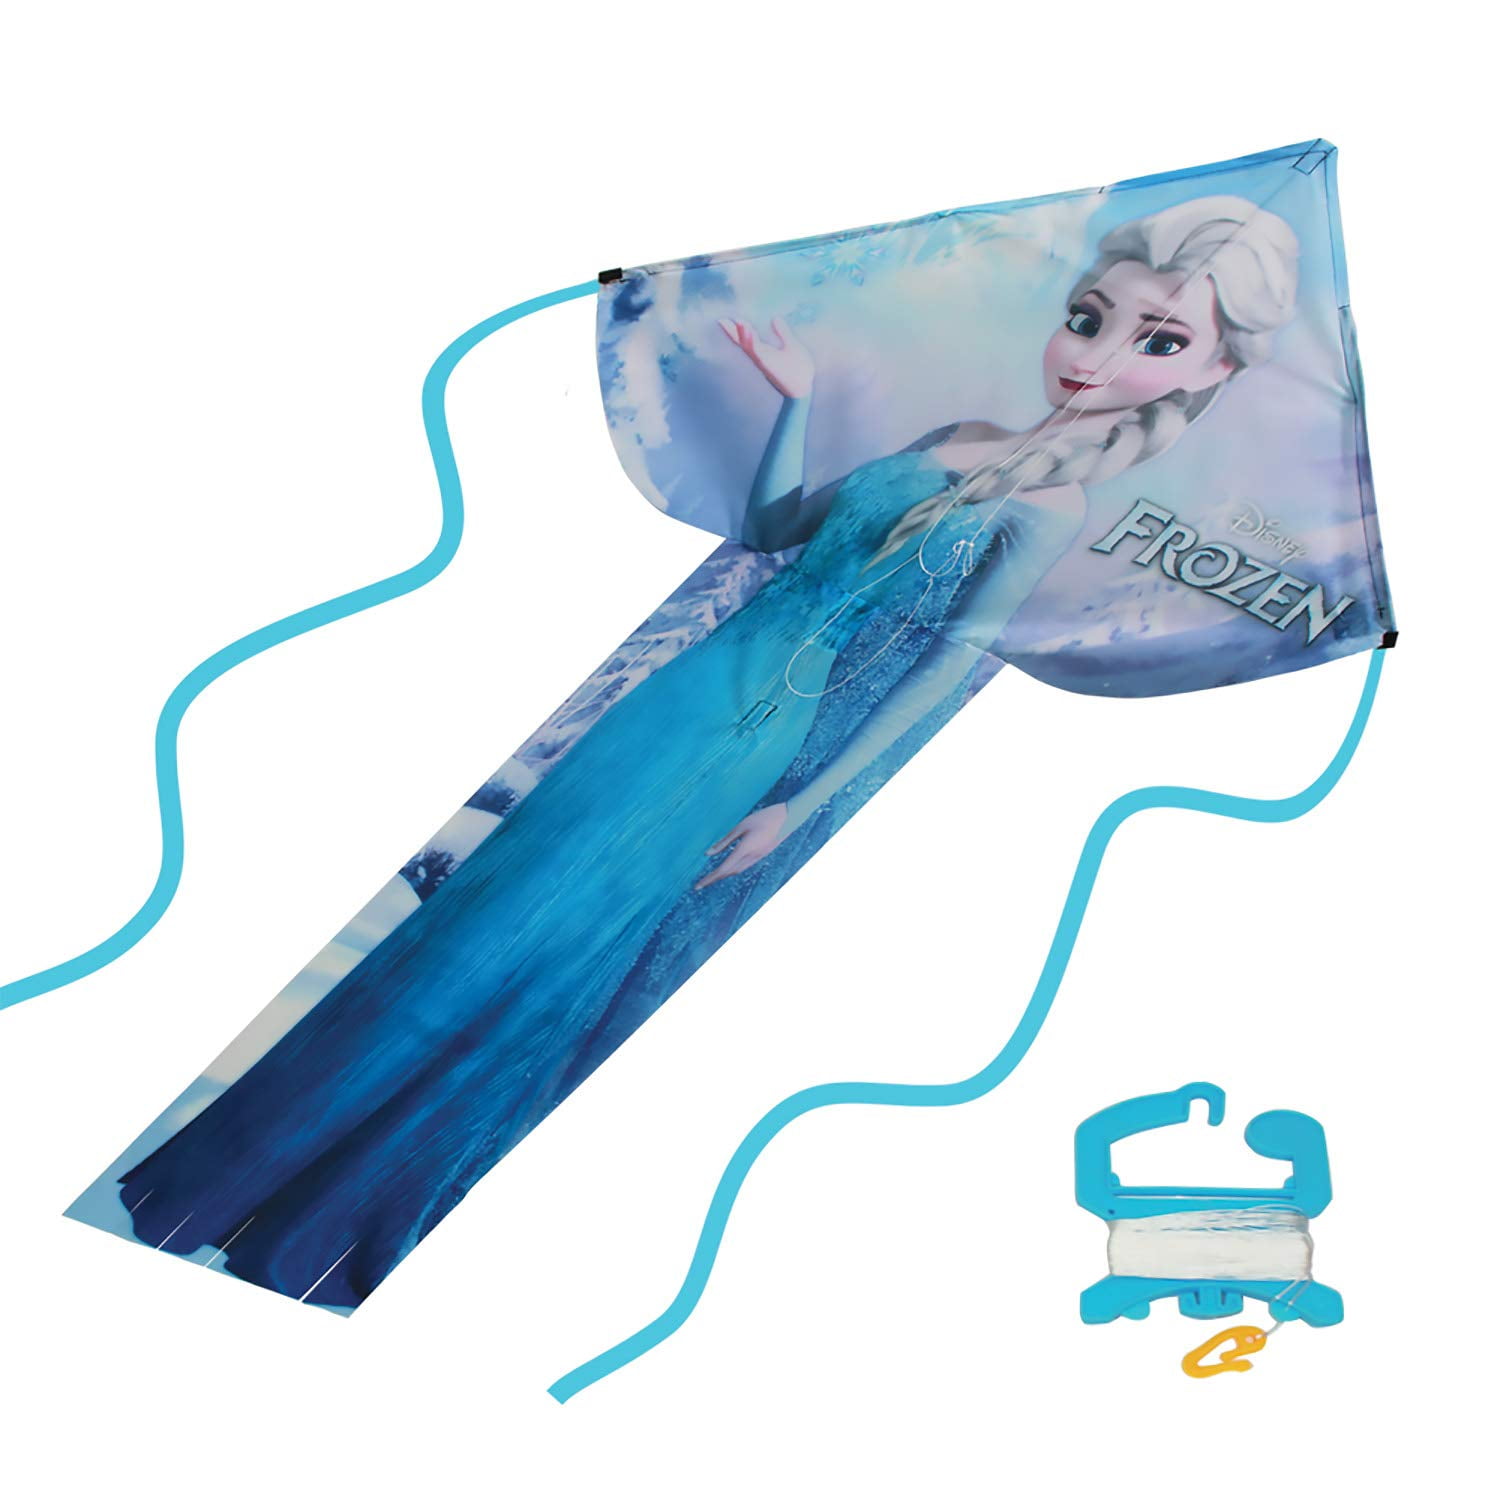 Disney Frozen Olaf Single Line Kite Easy To Fly Kid Outdoor Activity Toy Gift  